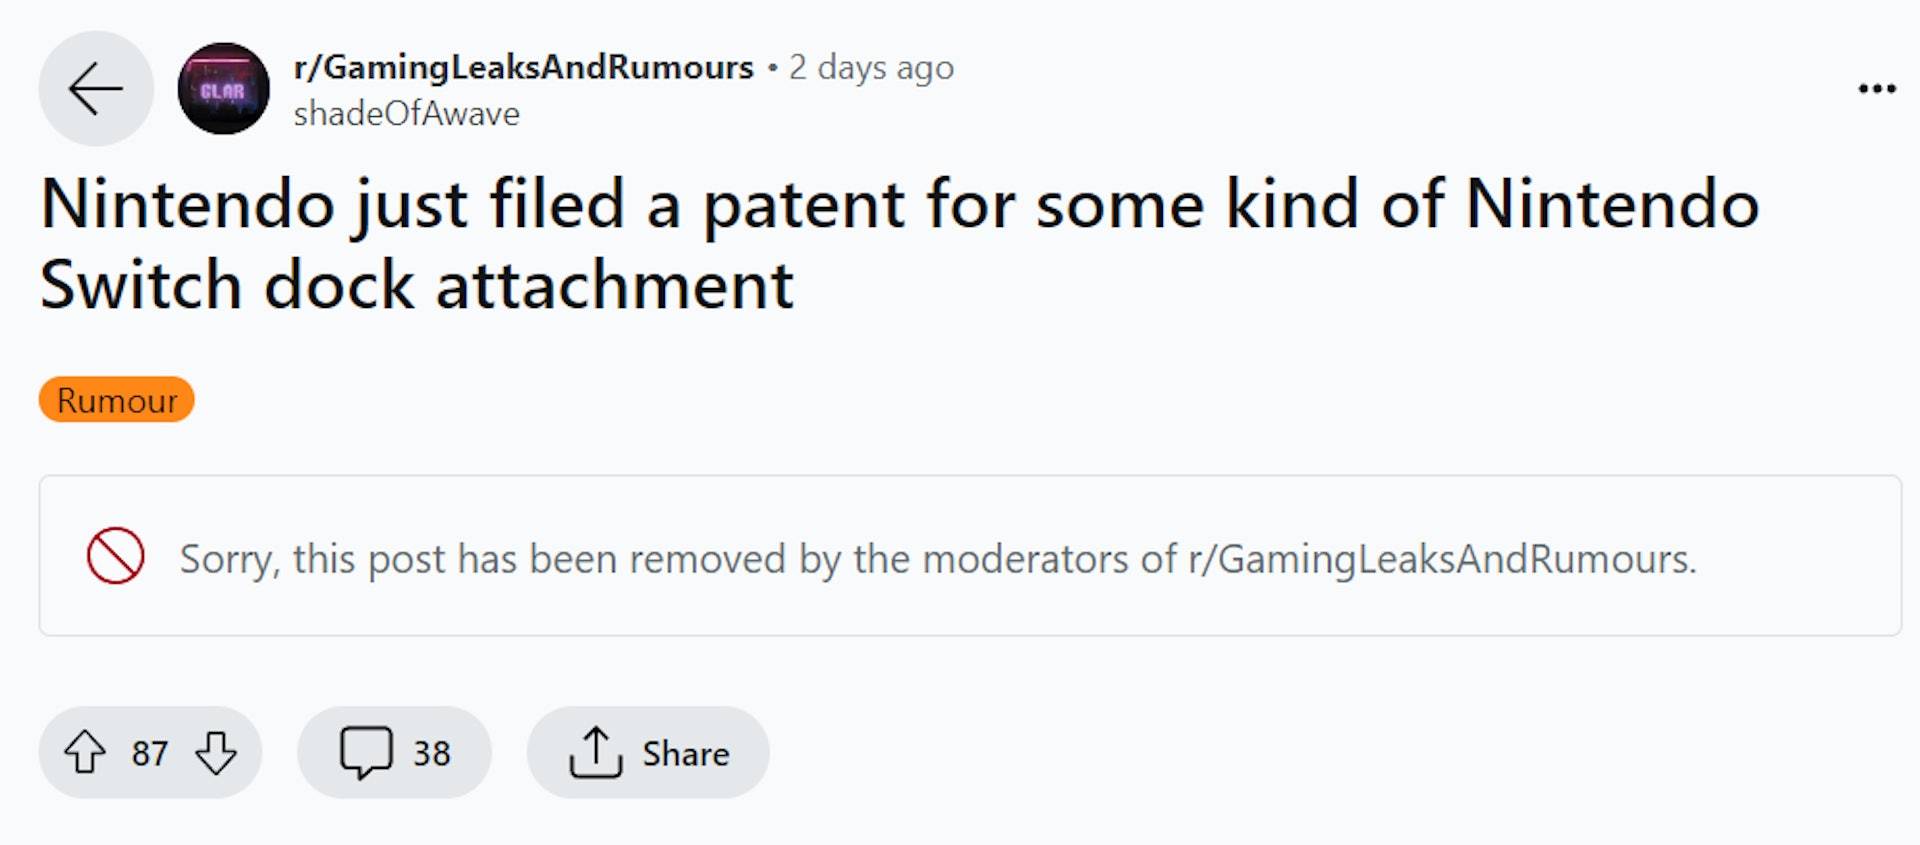 https://www.reddit.com/r/GamingLeaksAndRumours/comments/1bujh8m/nintendo_just_filed_a_patent_for_some_kind_of/